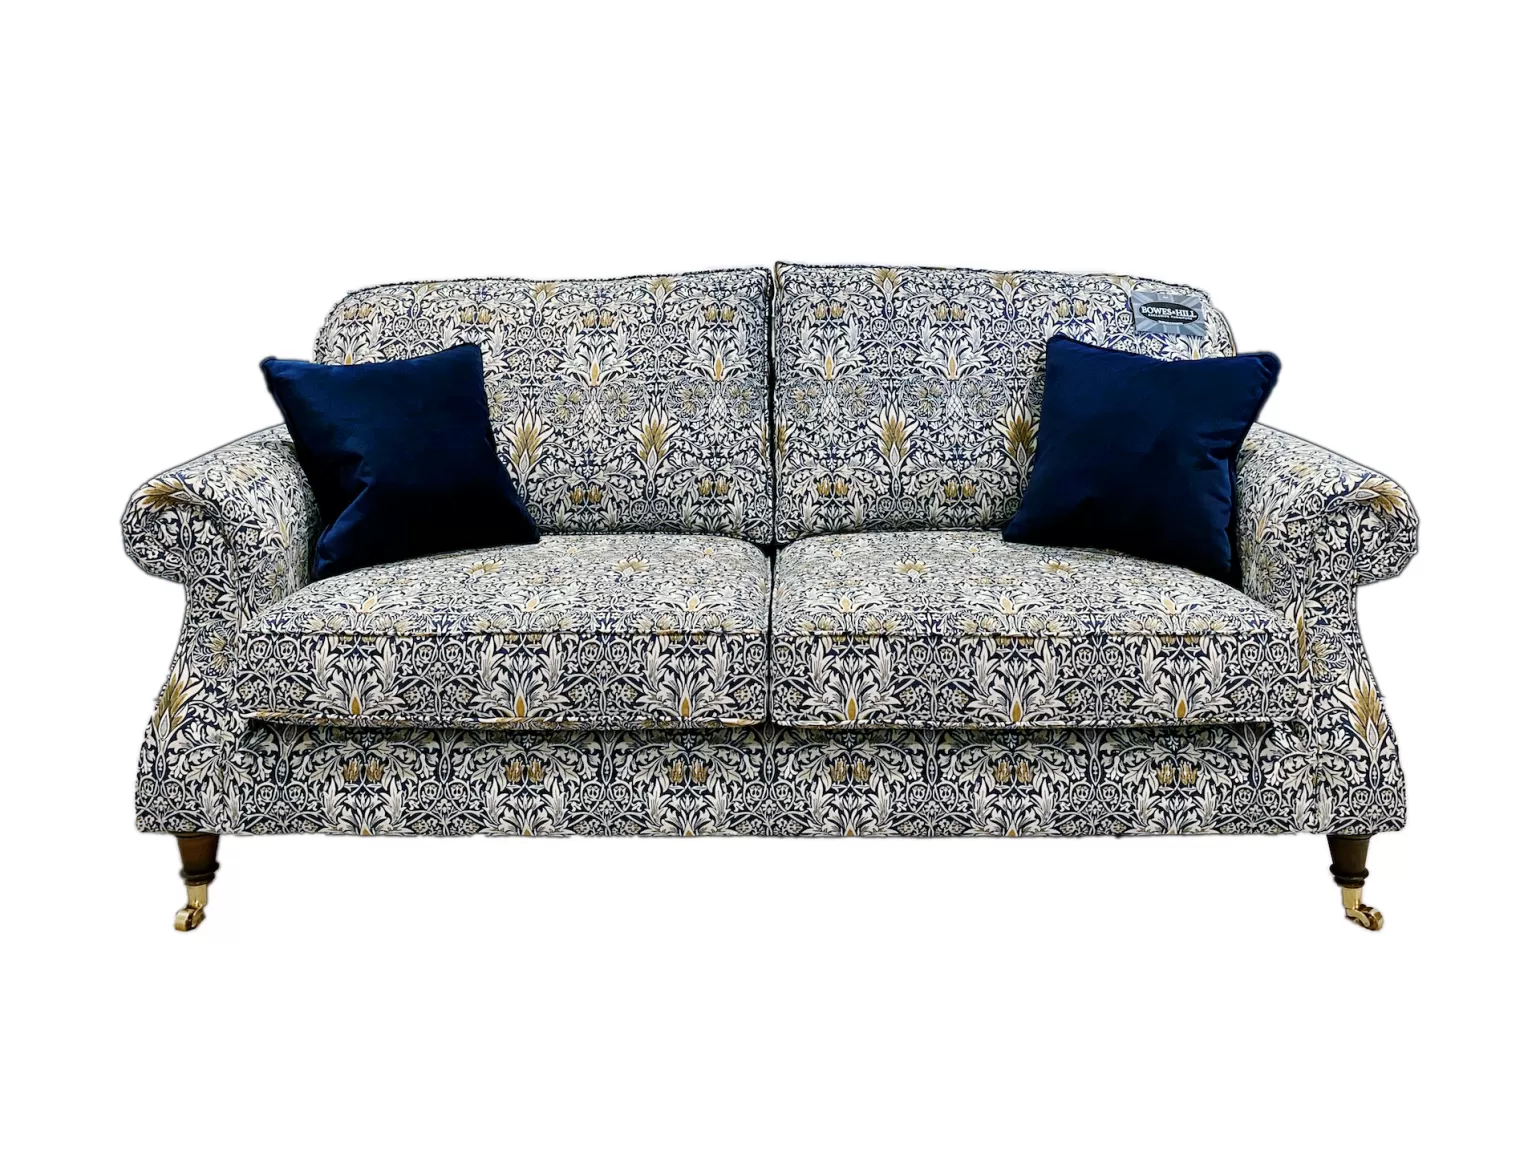 A beautiful classic design with inspiring lines incorporating curves to the back cushions and arm fascias.
